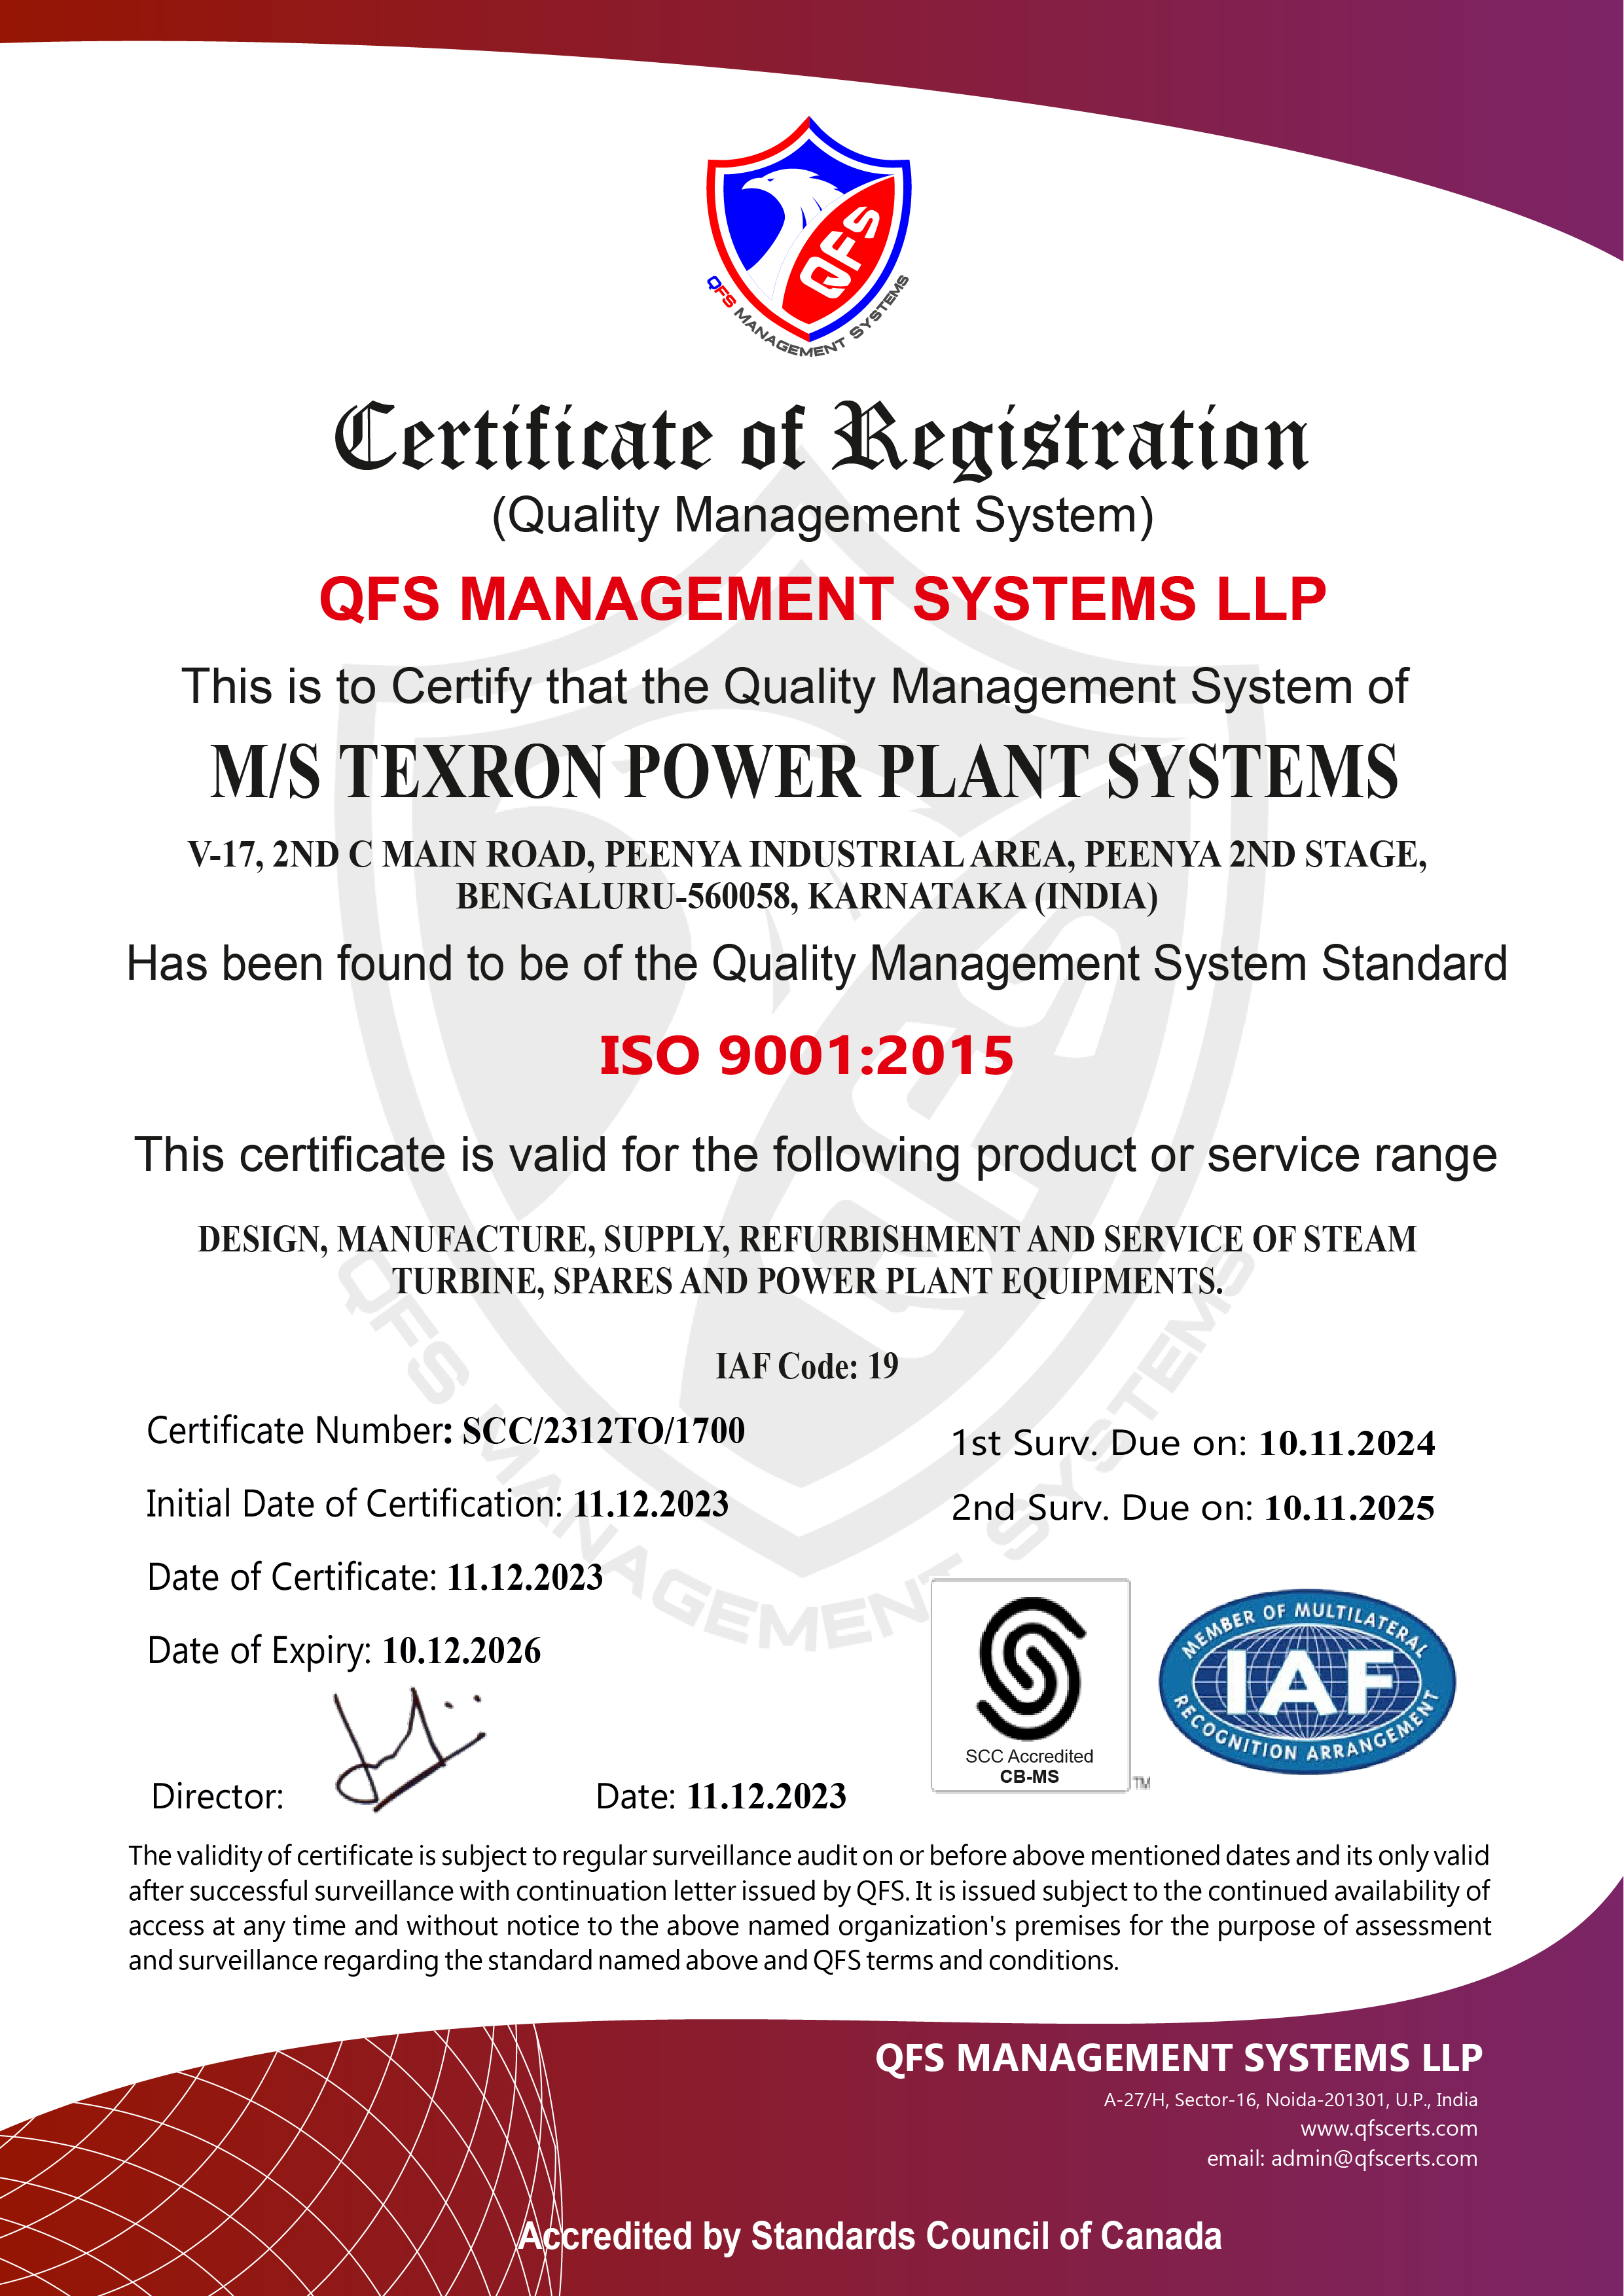 ISO CERTIFICATE-